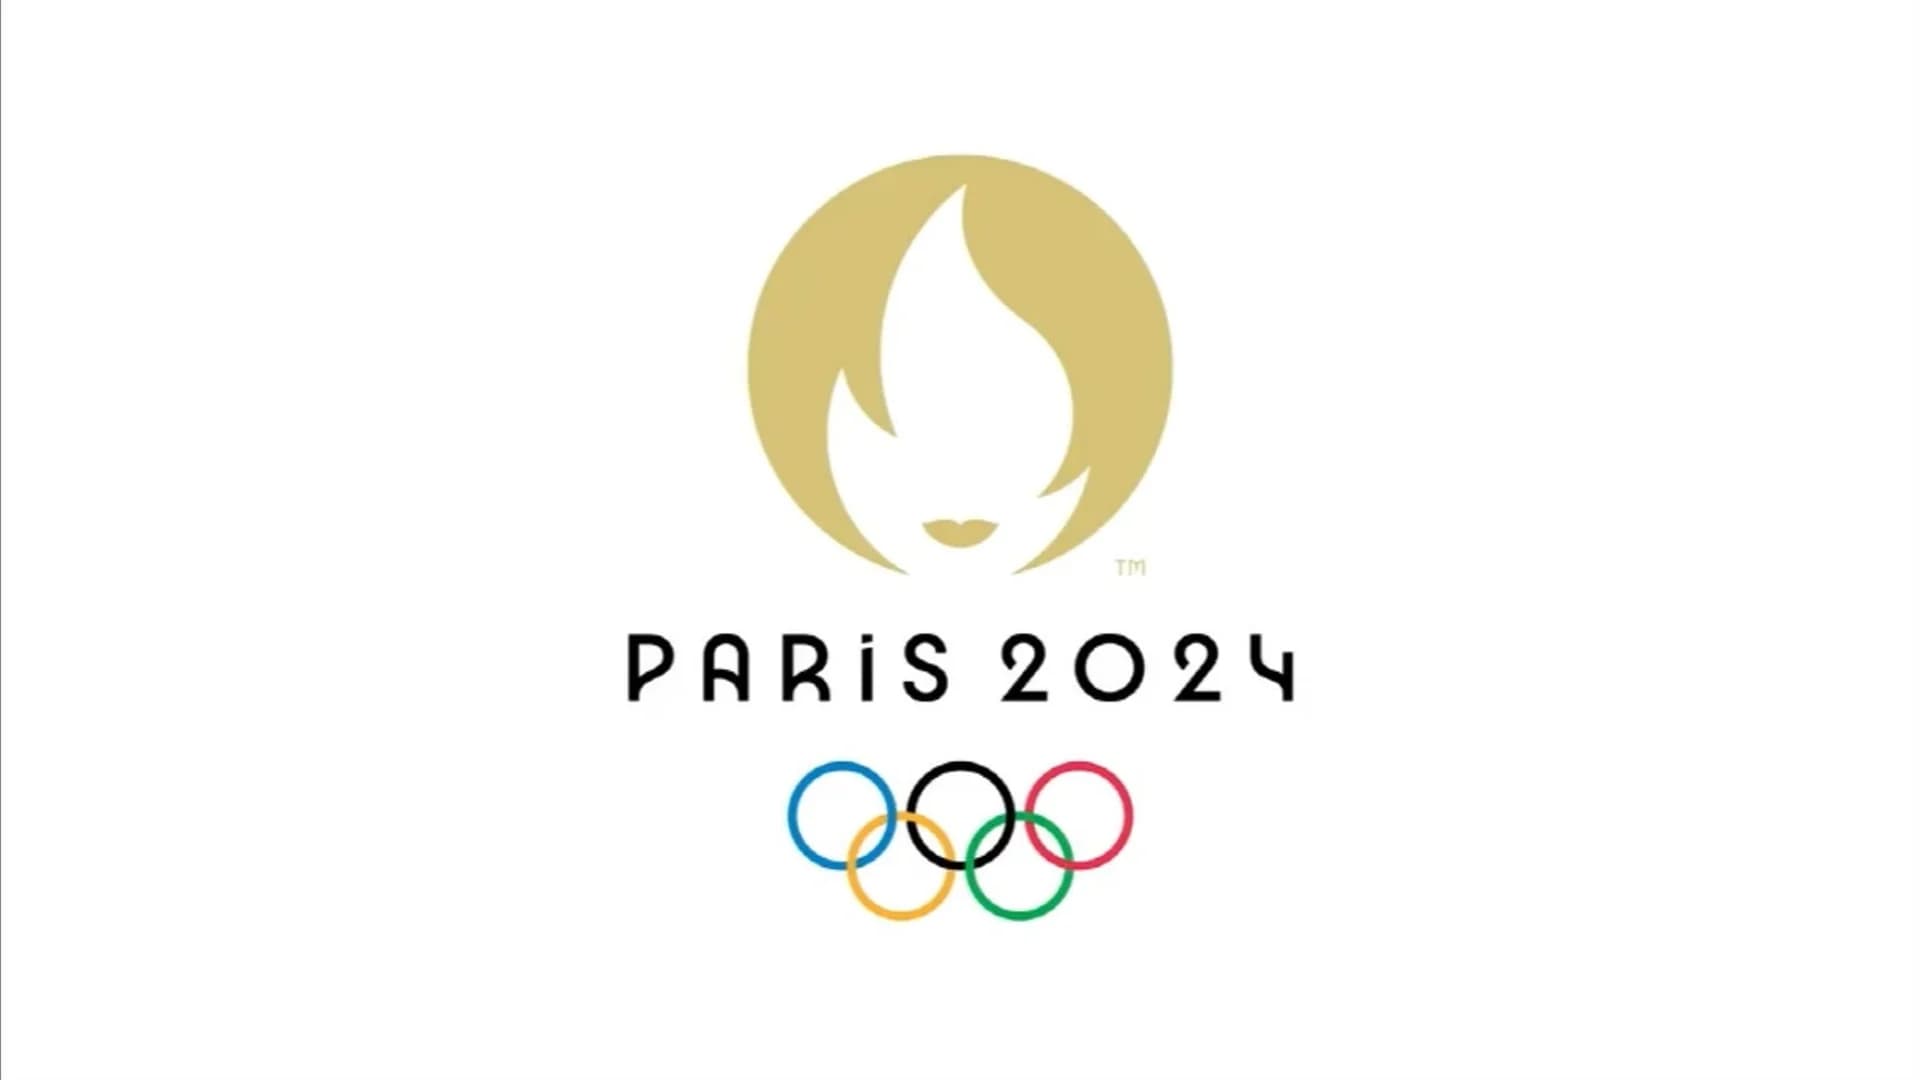 Olympic torch or dating site ad? Paris 2024 Olympics logo taking heat on social media